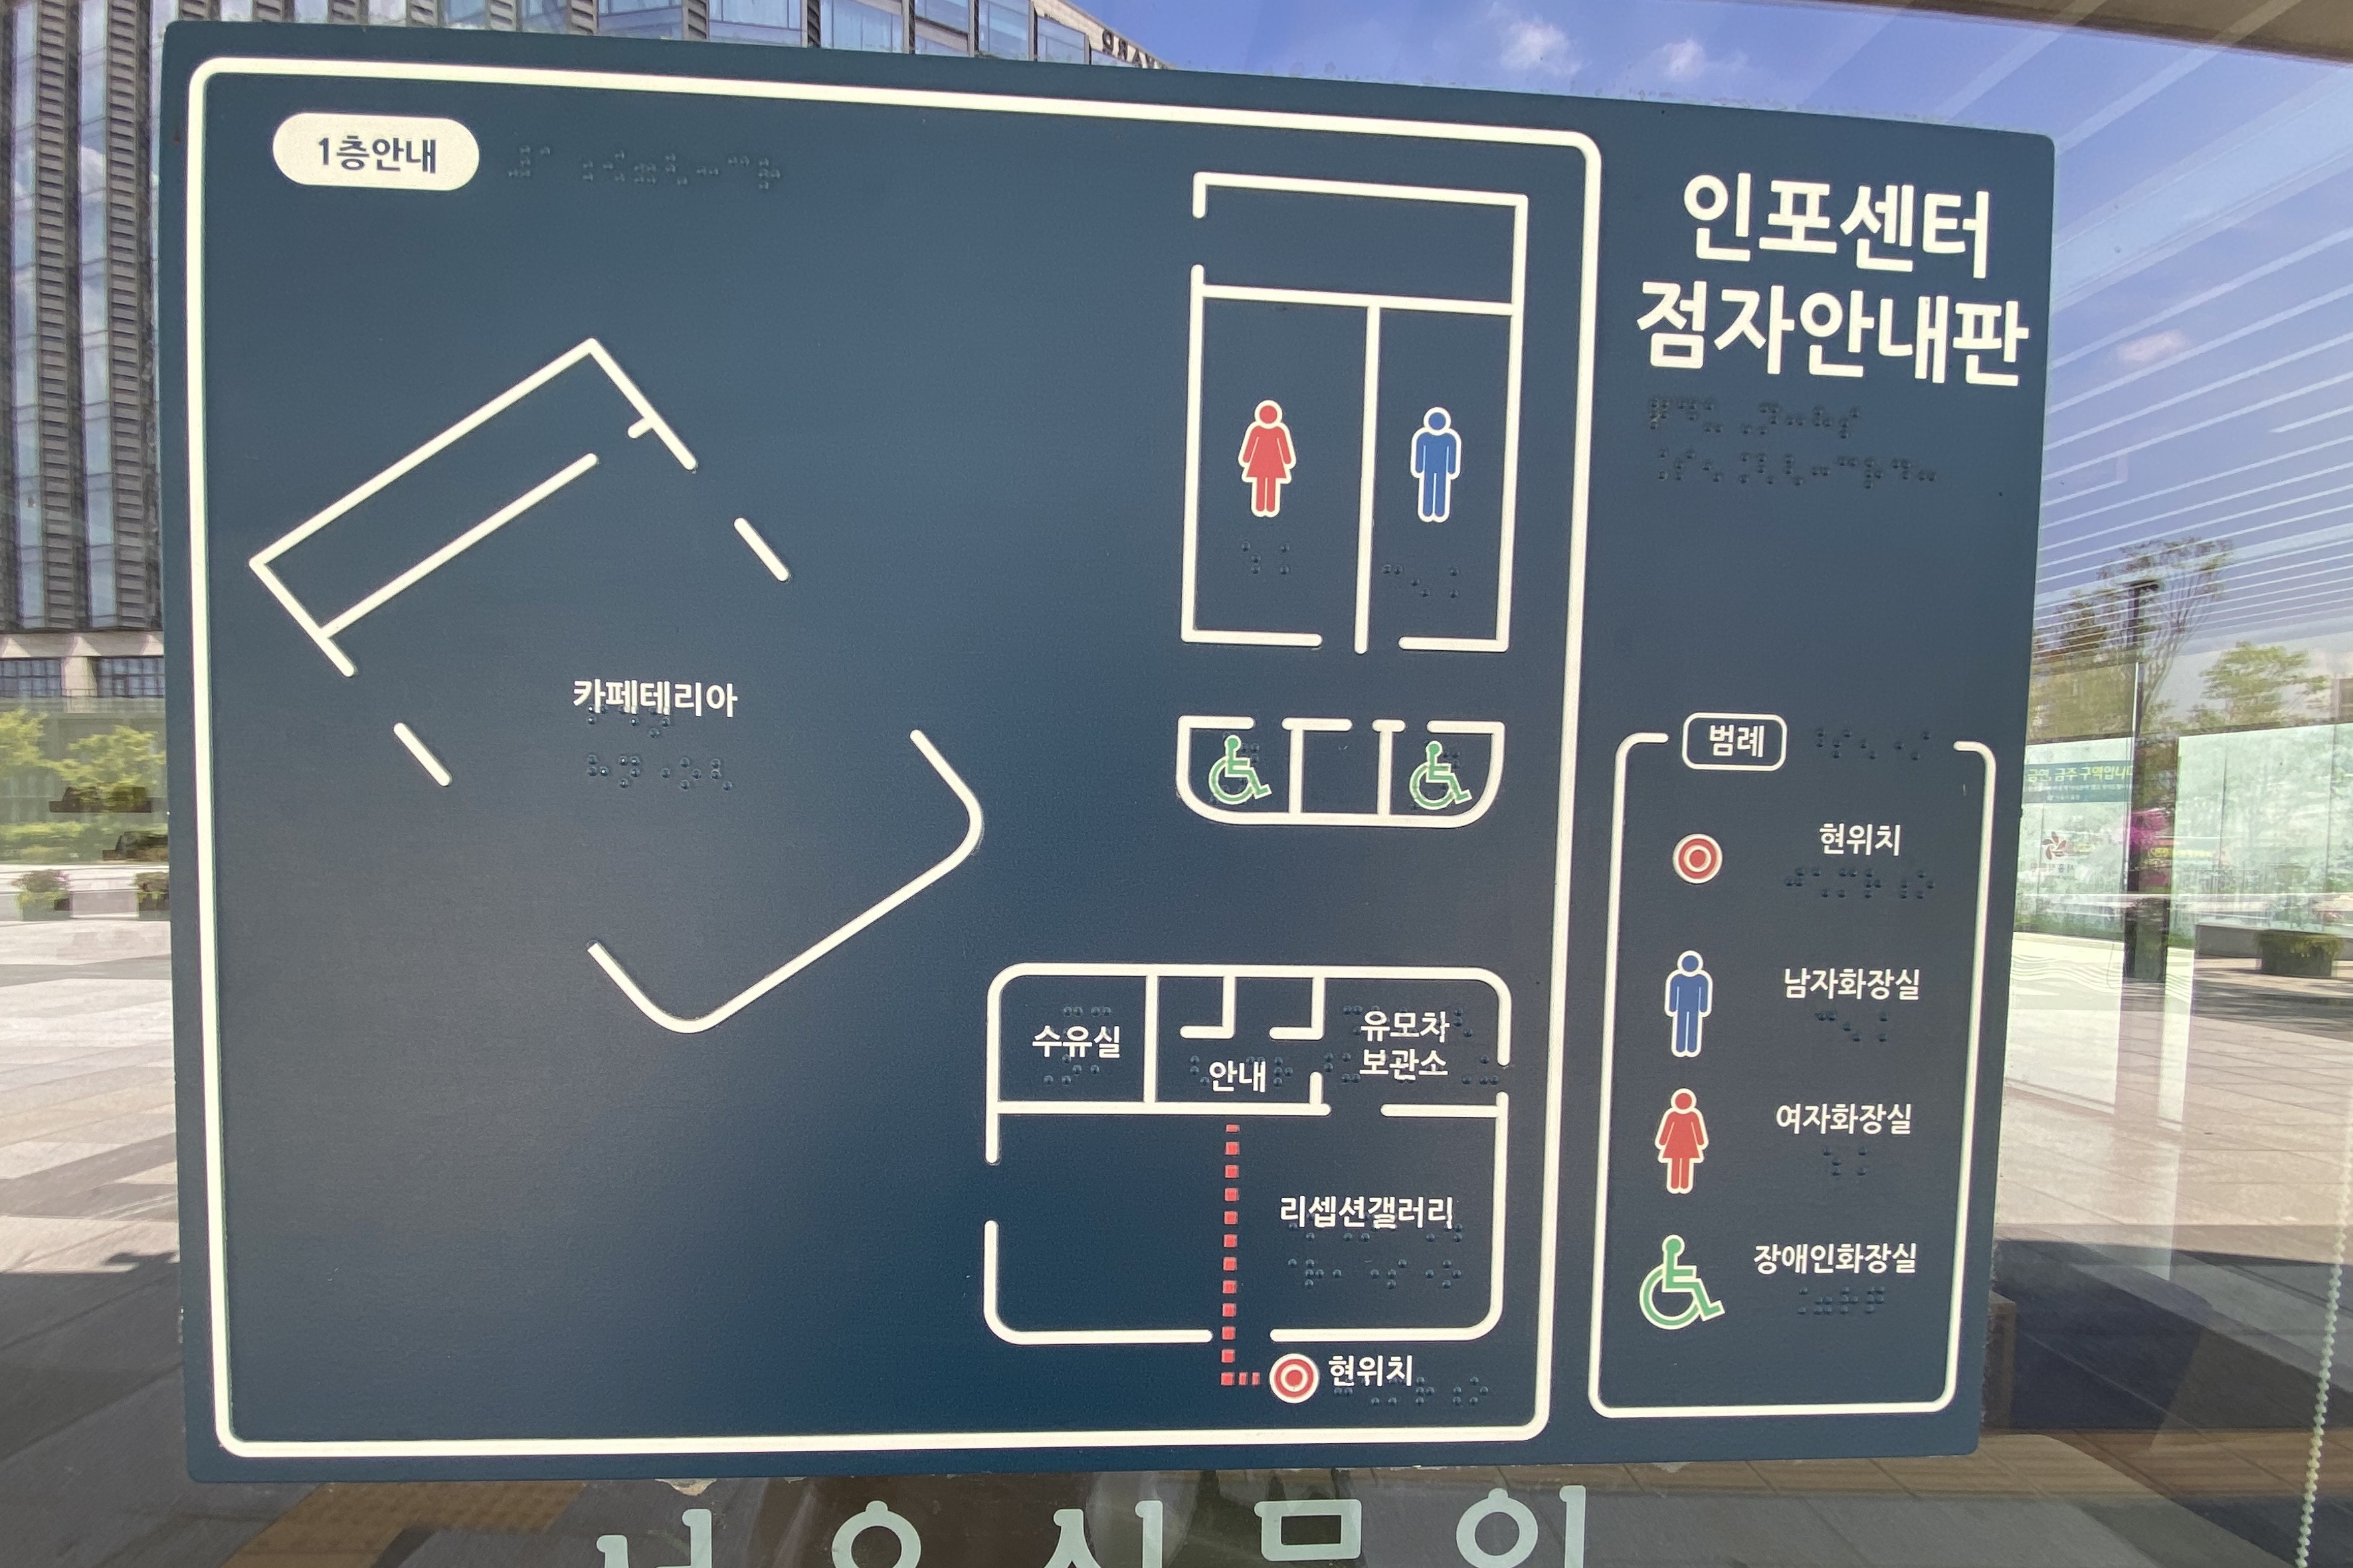 Guide map and information desk0 : Guide board with Korean braille description at the information center of Seoul Botanic Park
